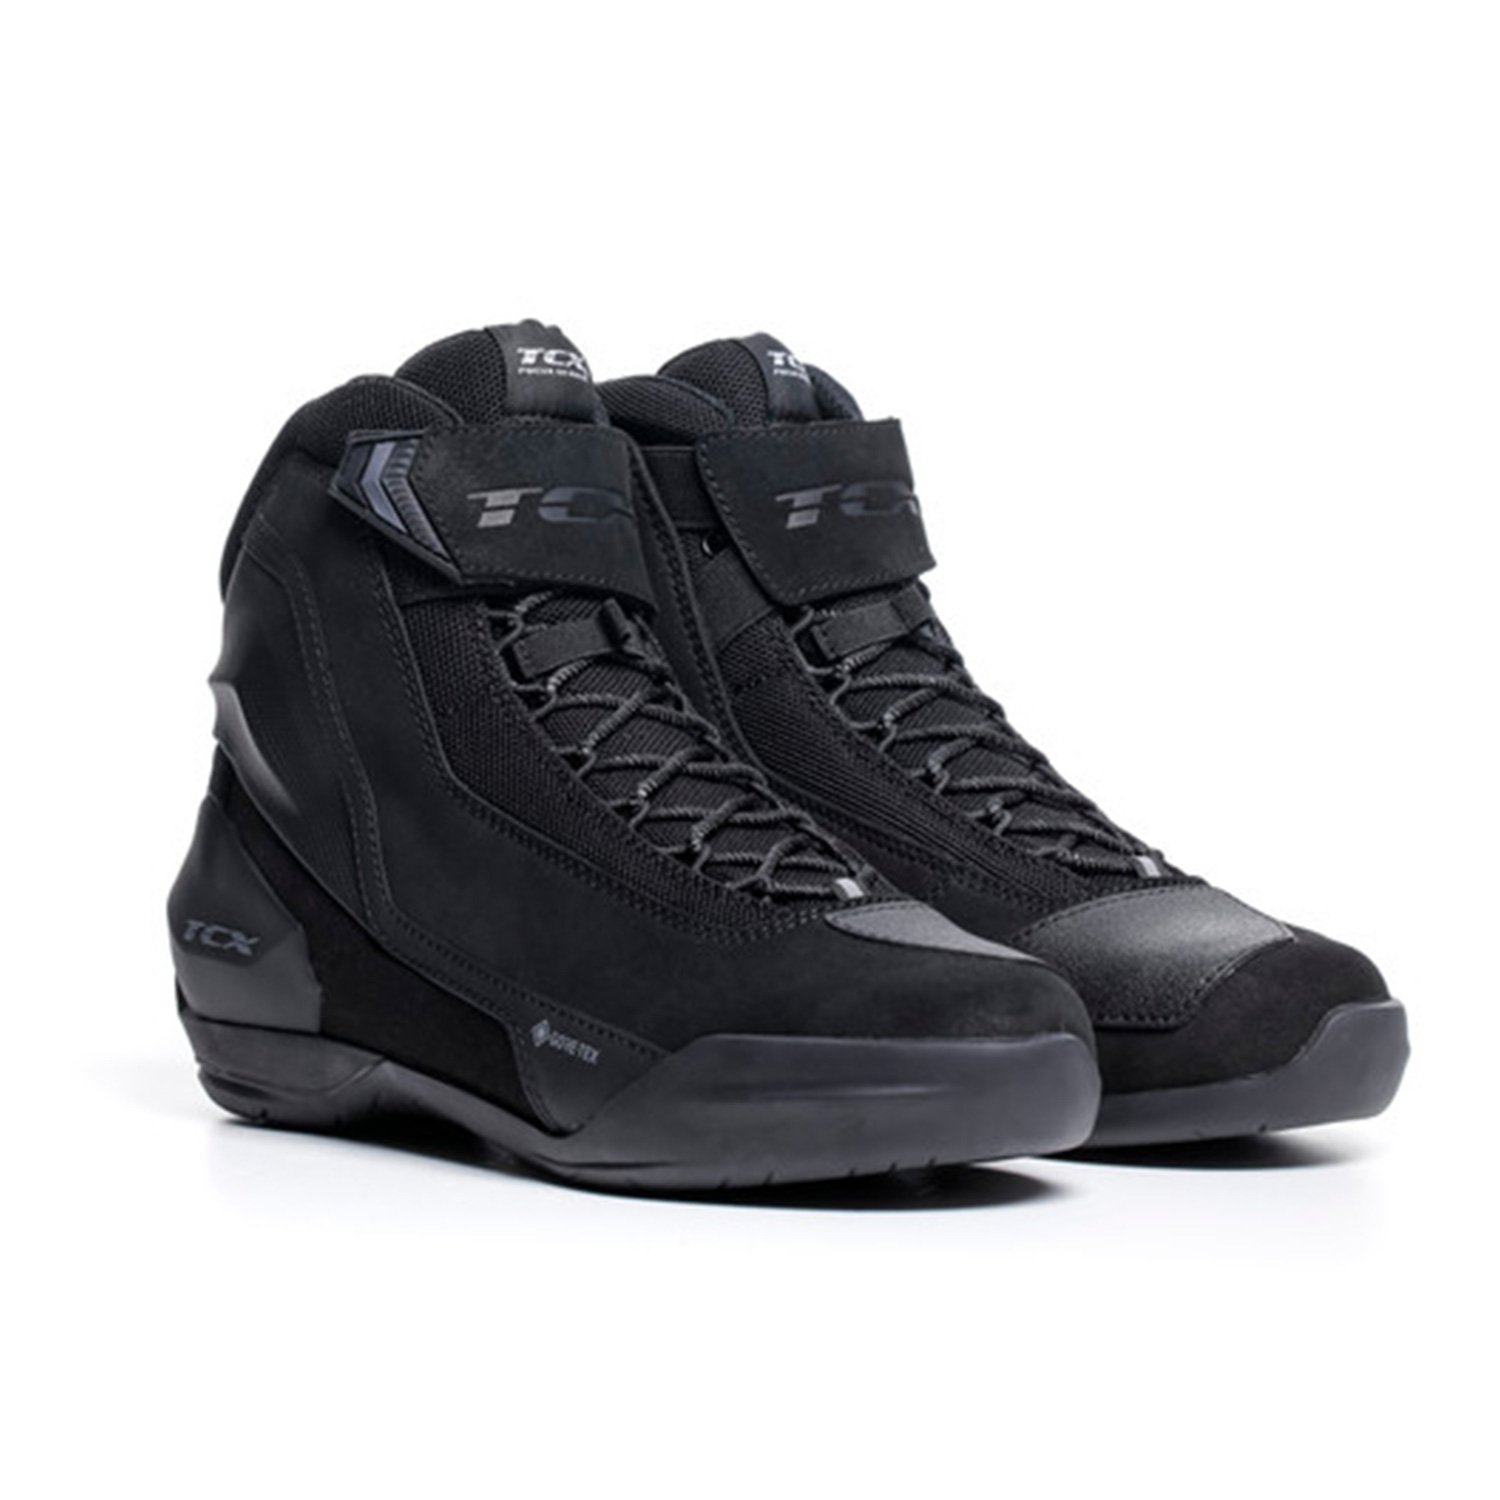 Image of TCX Jupiter 5 Gore-Tex Noir Chaussures Taille 41